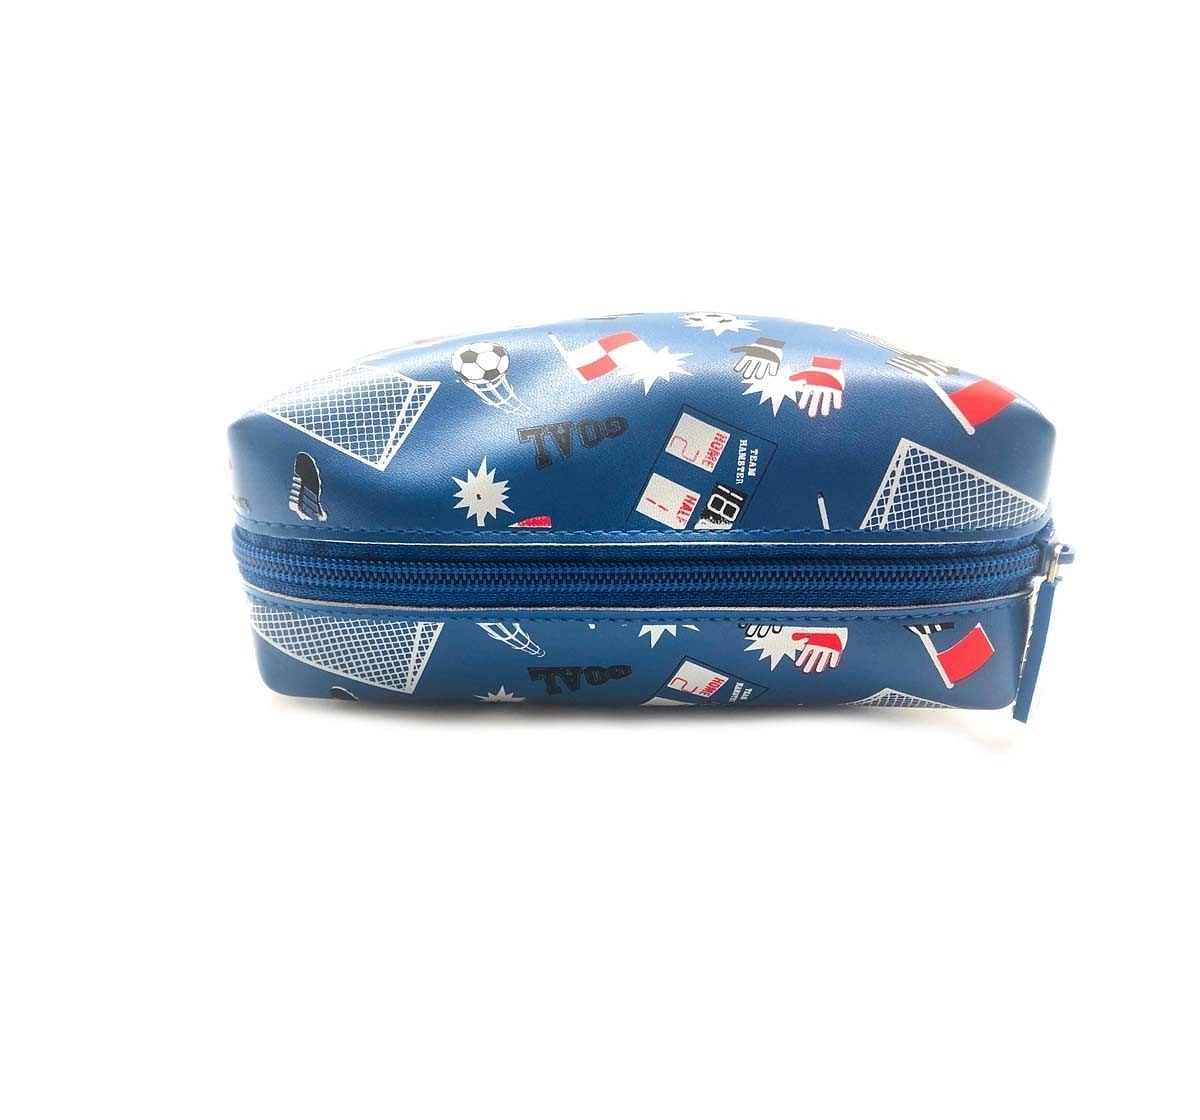 Hamster London Rectangle Pouch Football Bags for Age 3Y+ (Blue)